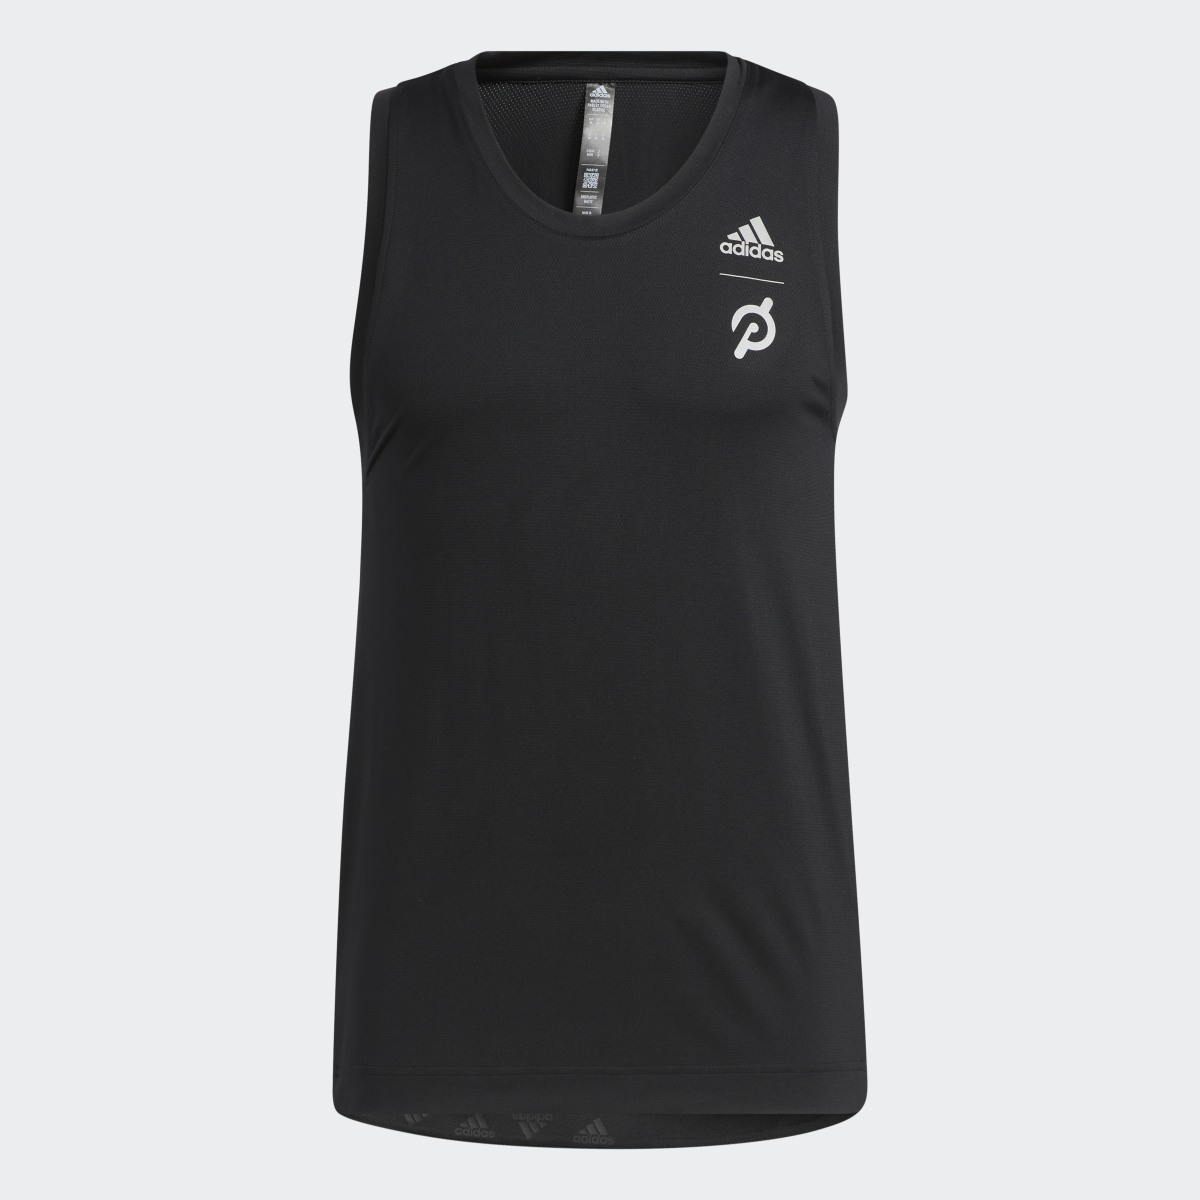 Adidas Capable of Greatness Training Tank Top. 5